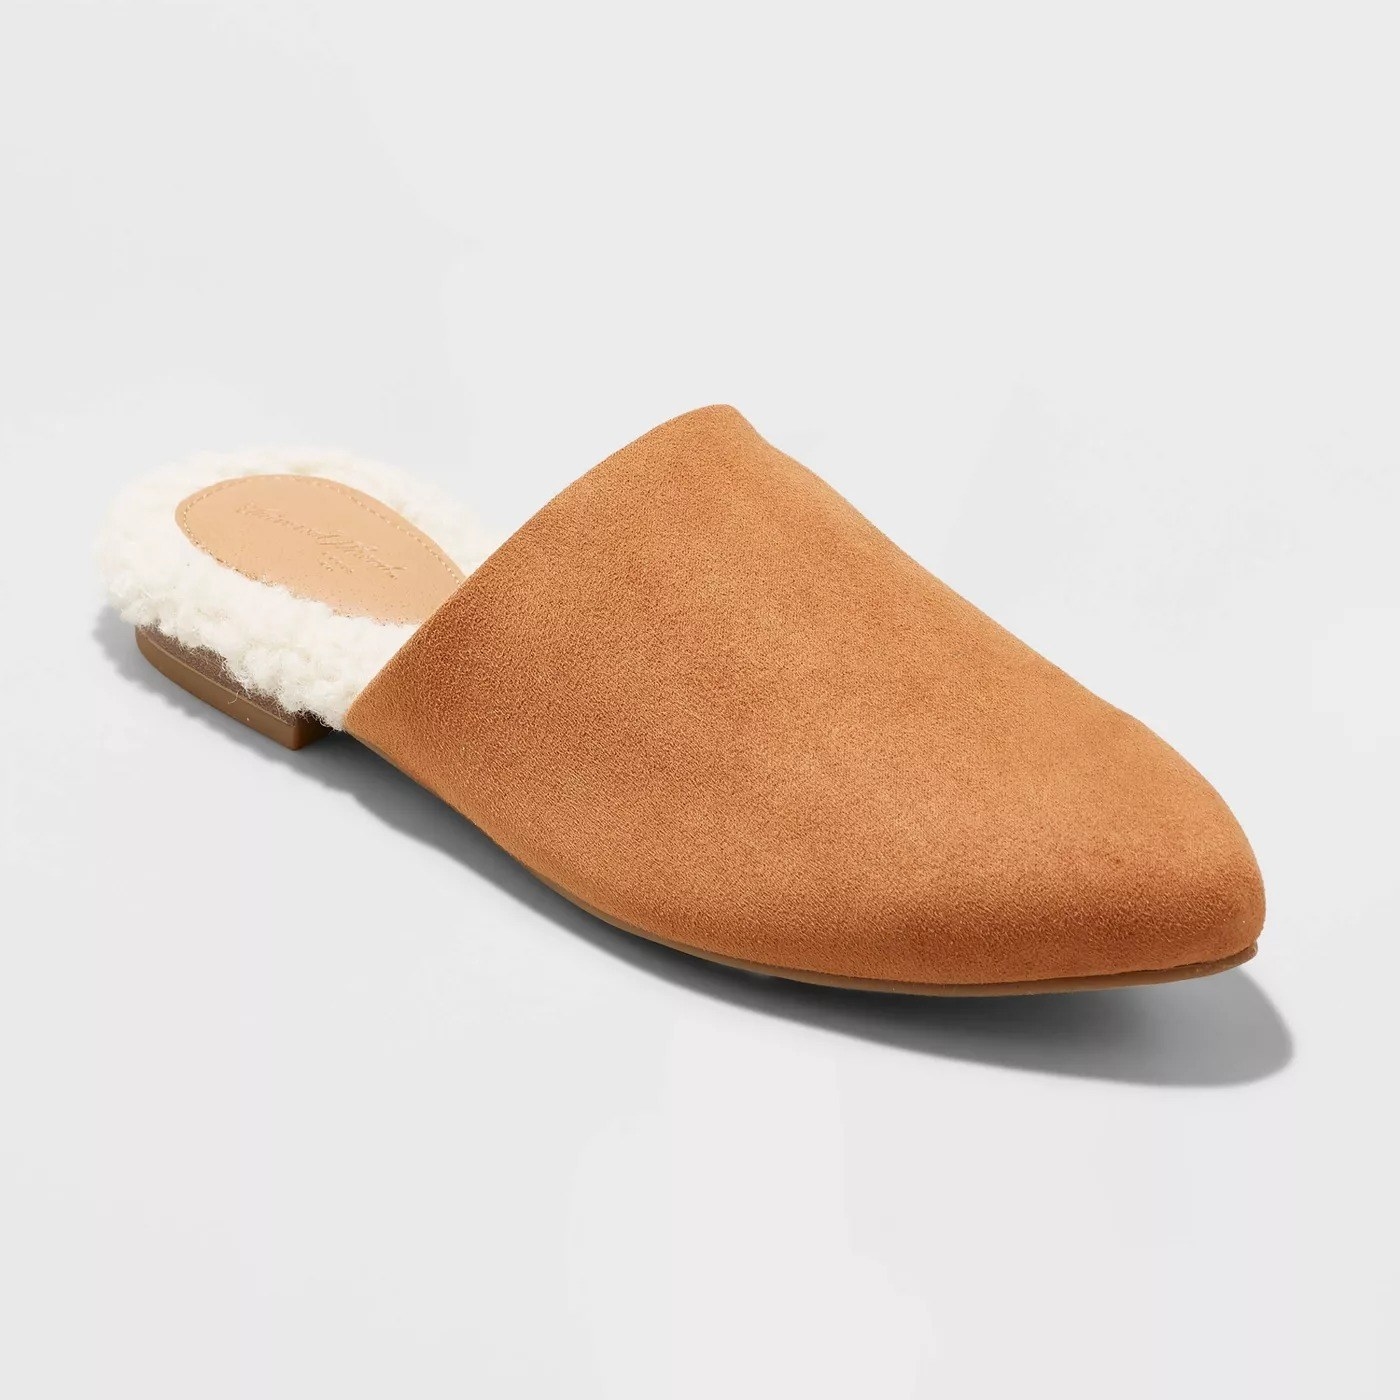 The camel colored mule, with white faux fur on the inside heel